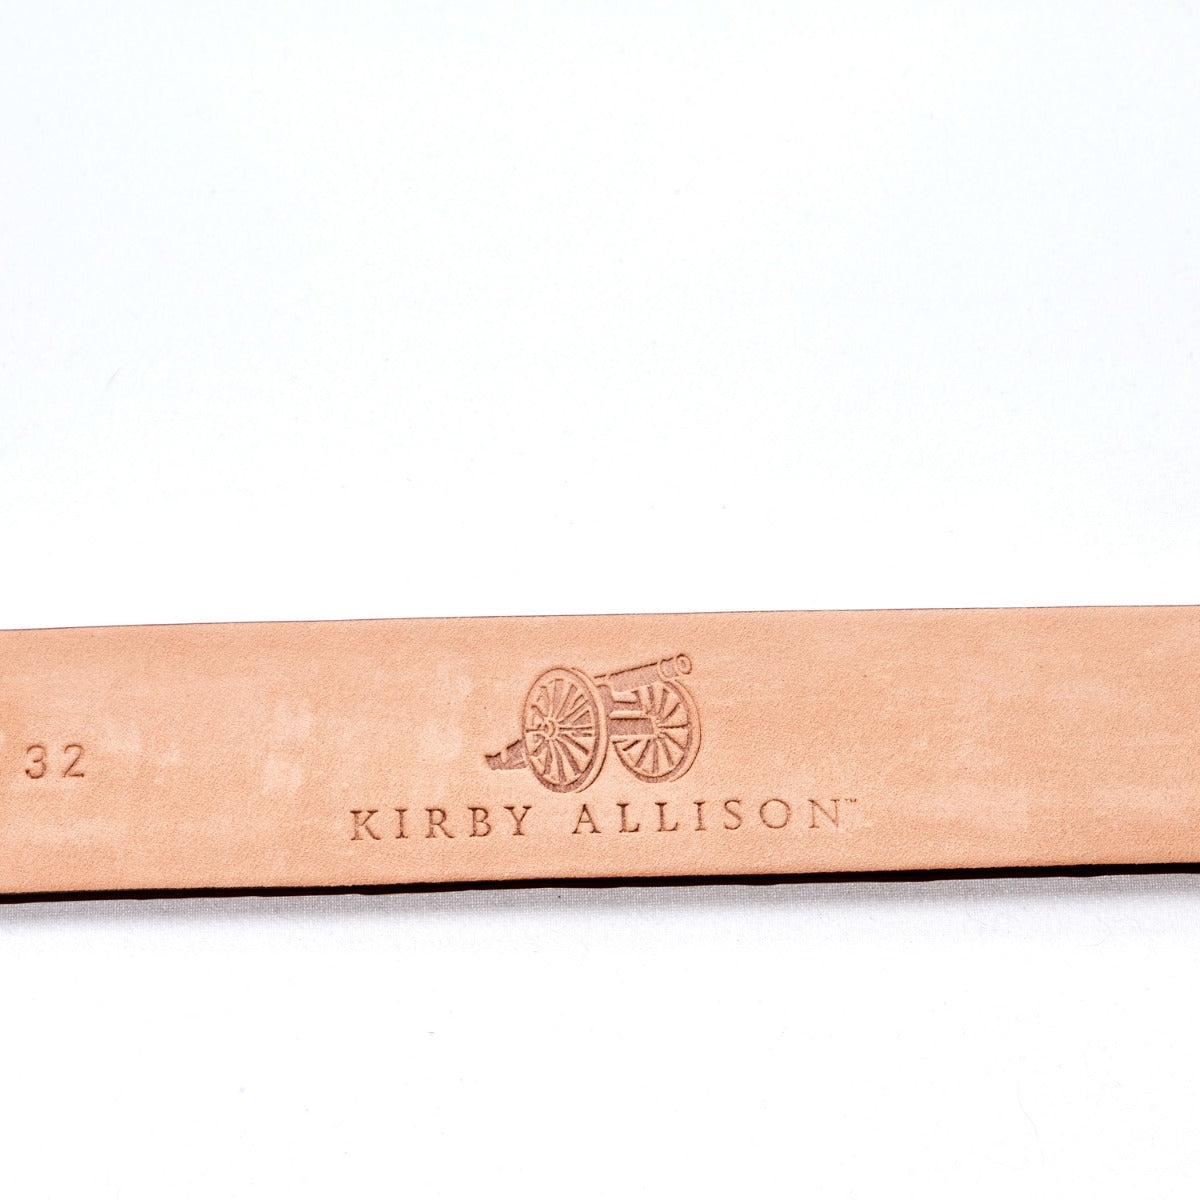 A Sovereign Grade Cognac Crocodile Belt from KirbyAllison.com with the word kerry allison on it.